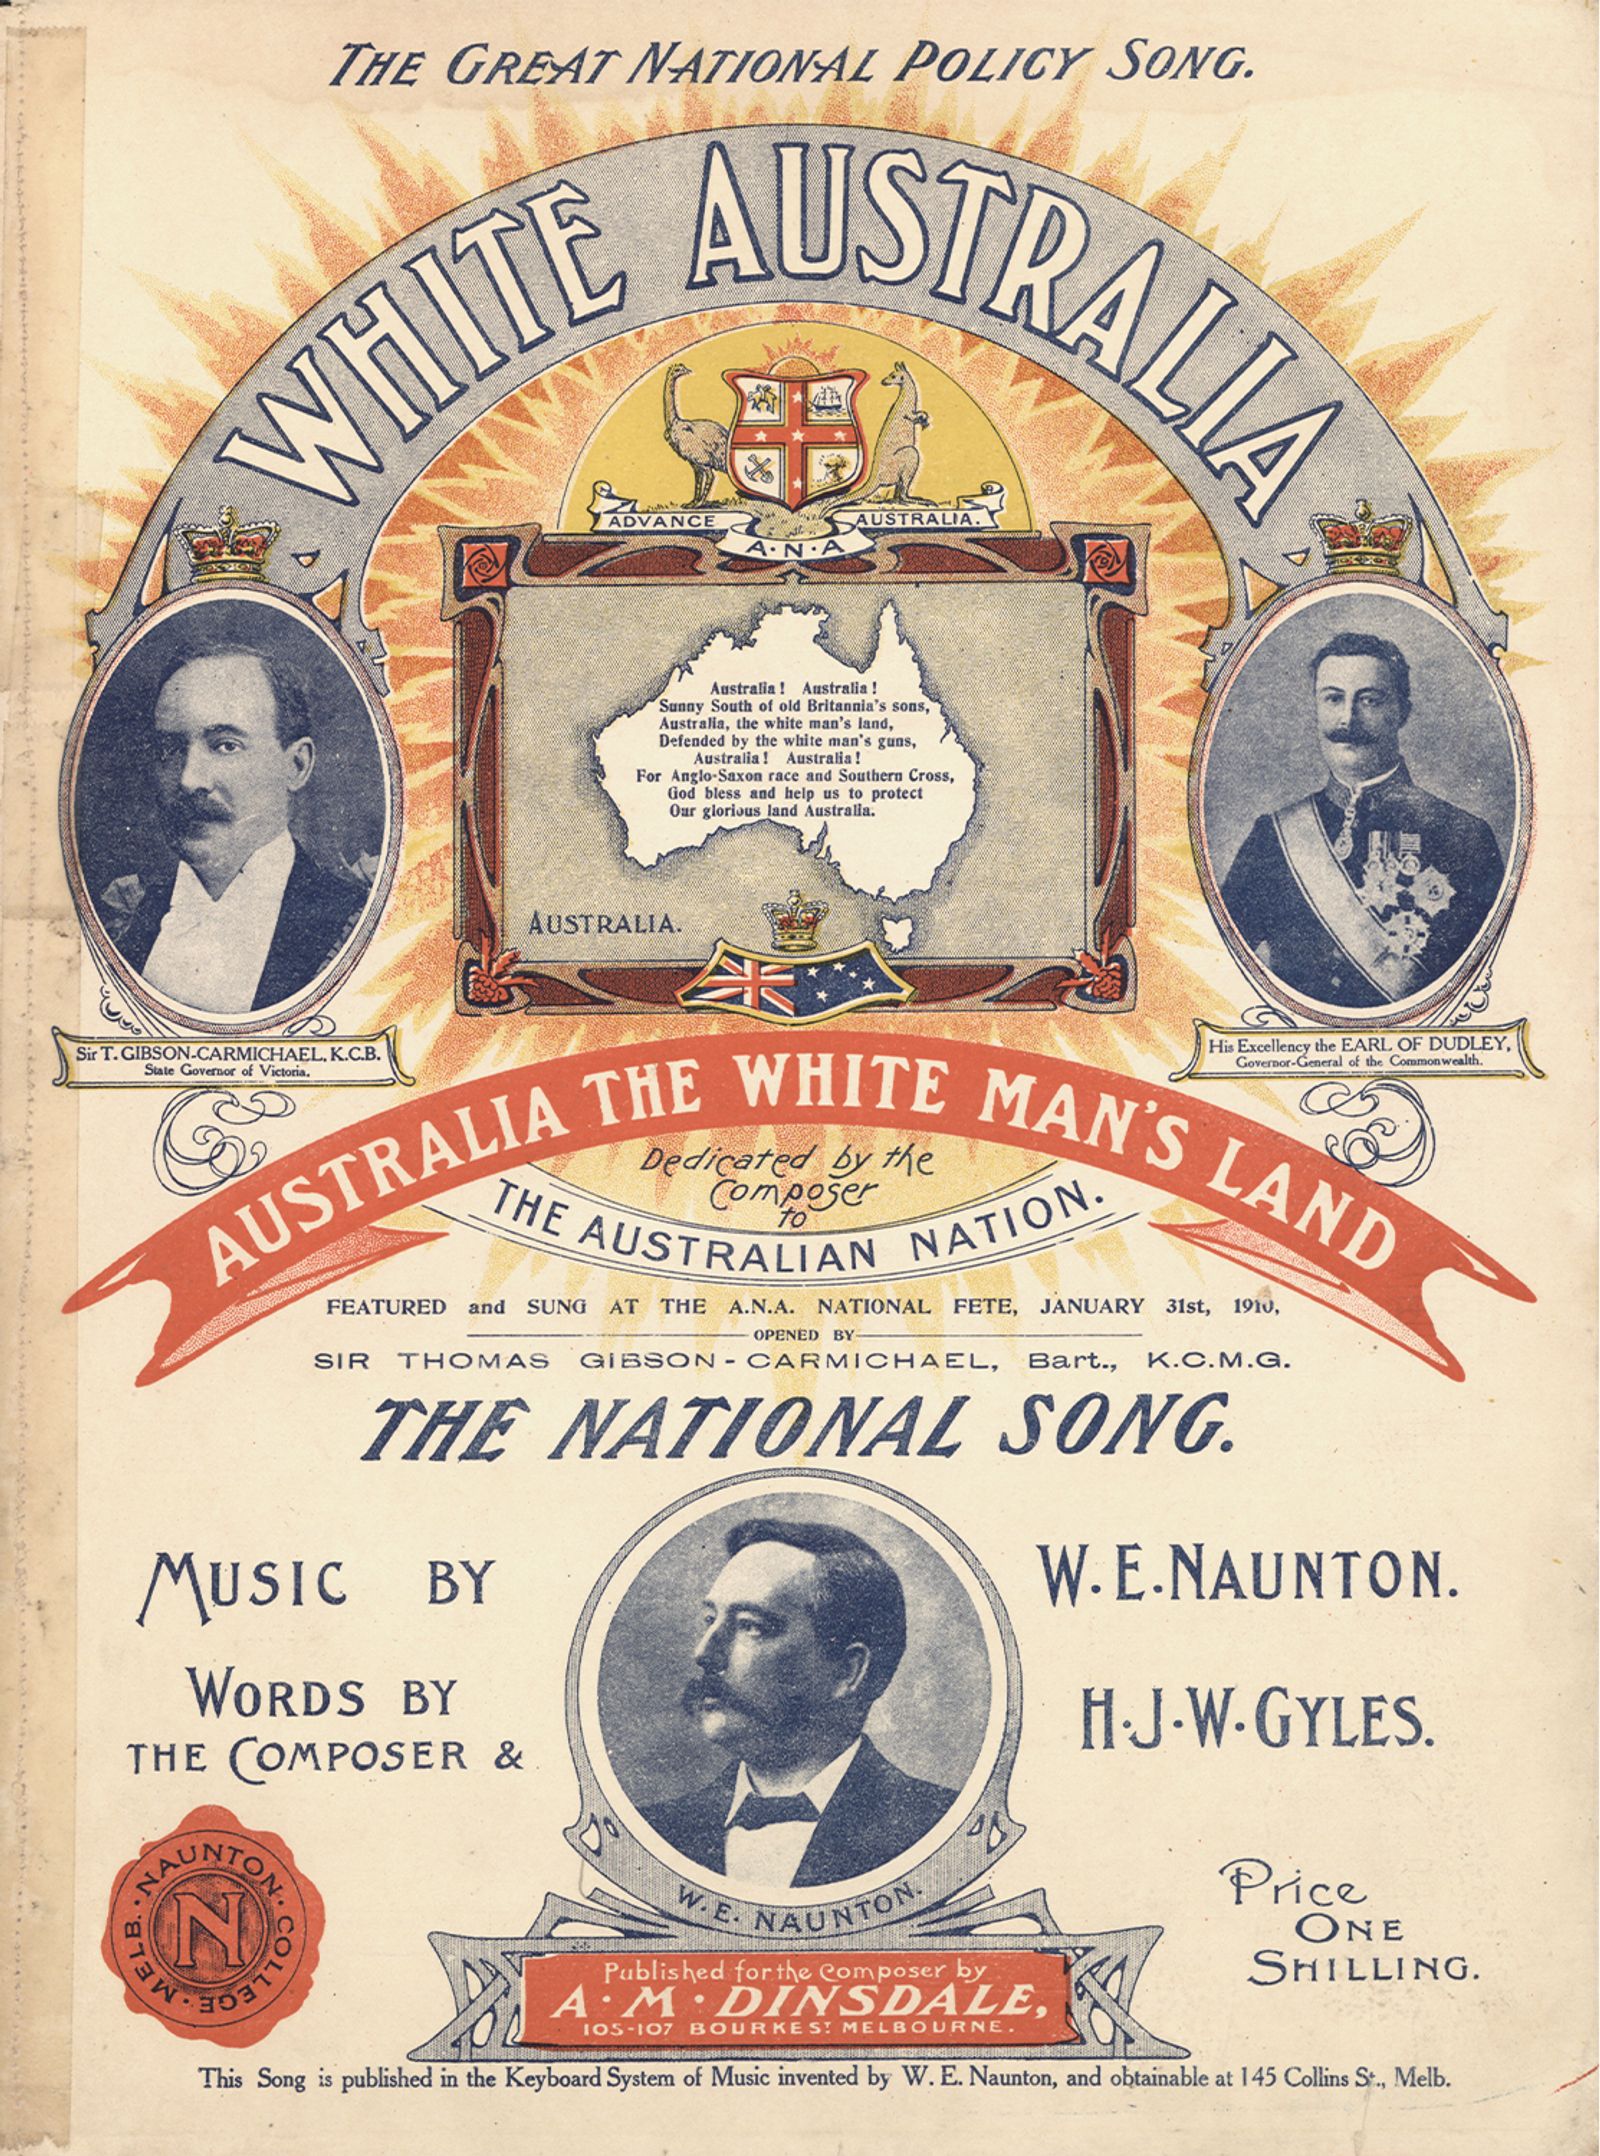 © Erin Lee - White Australia: The Great National Policy song. Music by W. E. Naunton, words by the composer and H. J. W. Gyles.